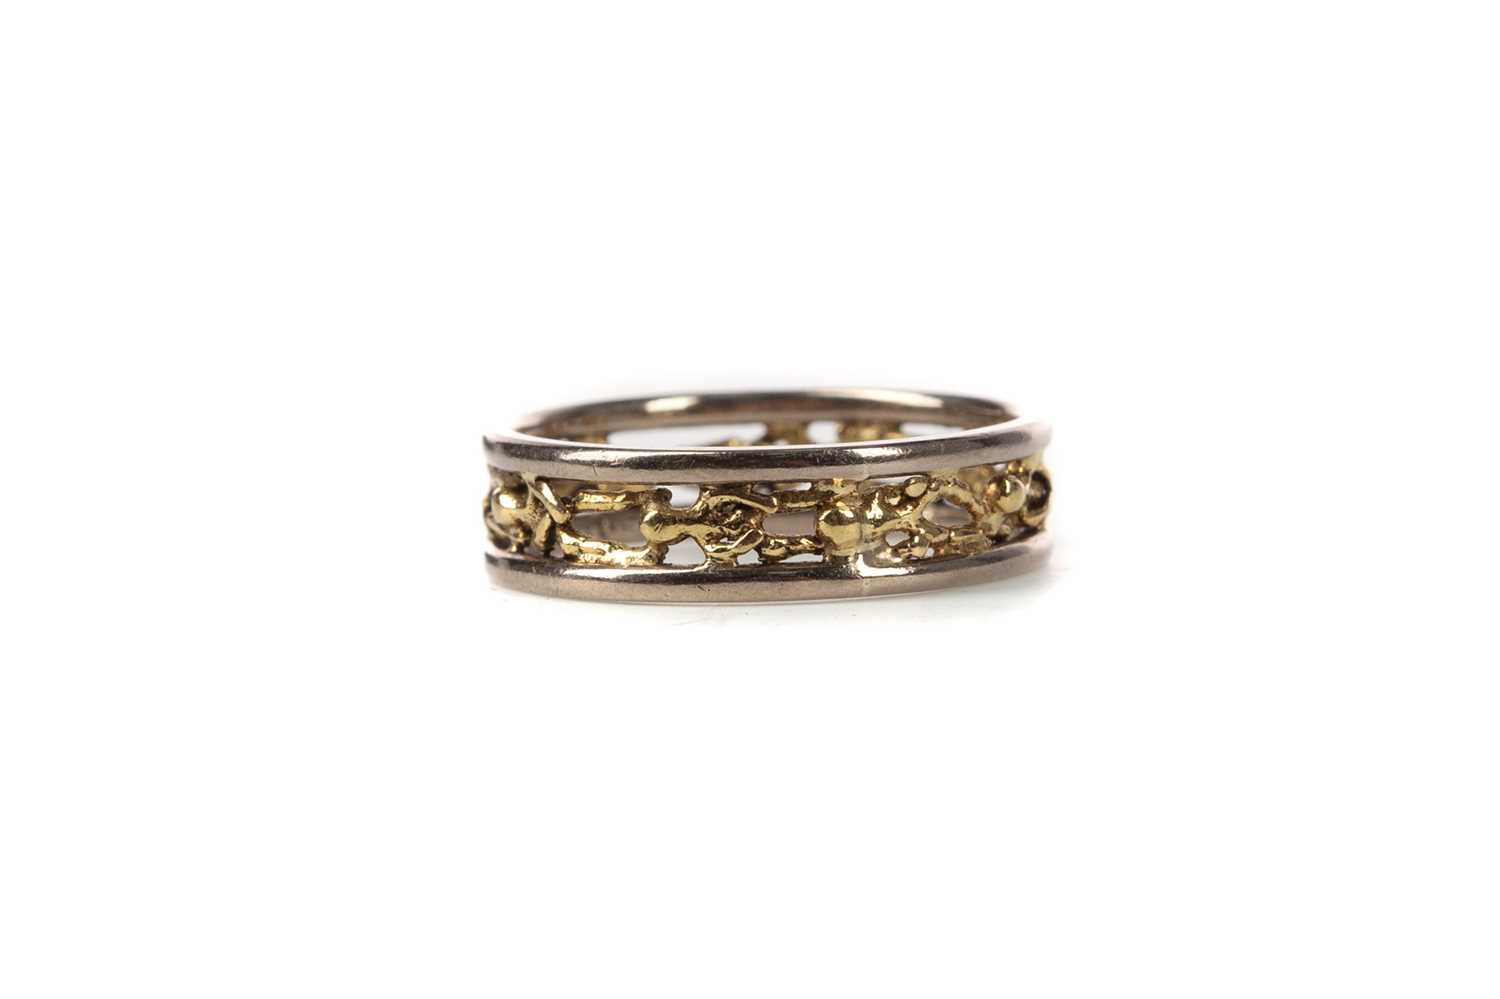 Lot 462 - A STUART DEVLIN 18 CARAT YELLOW AND WHITE GOLD 'PEOPLE' RING